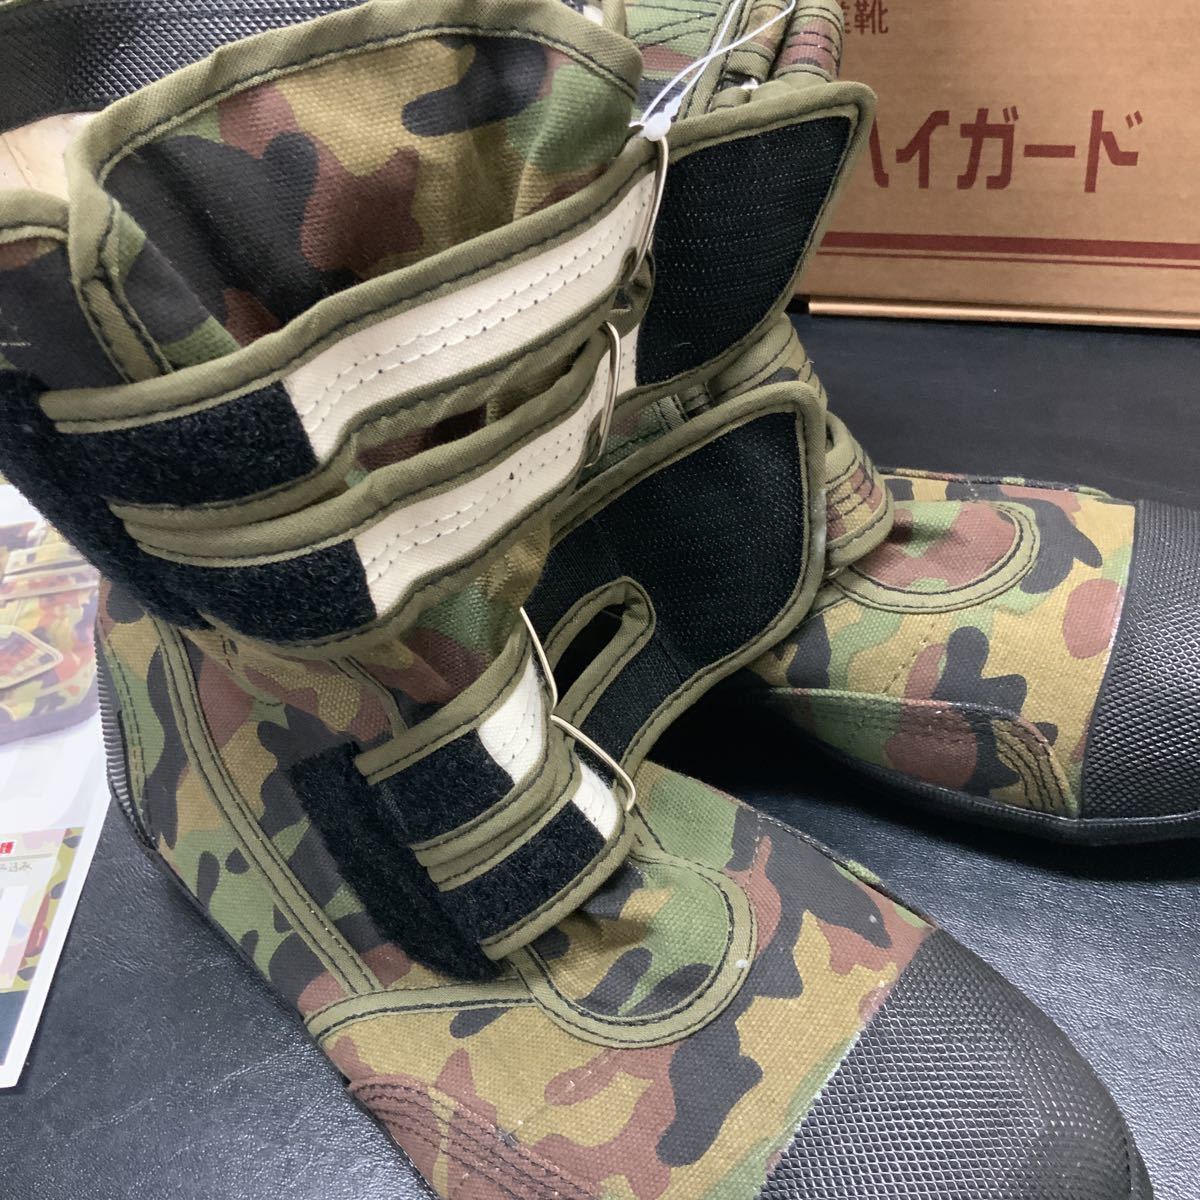  nationwide free shipping HG-220 25cm power . power Ace high guard camouflage green safety shoes new goods 